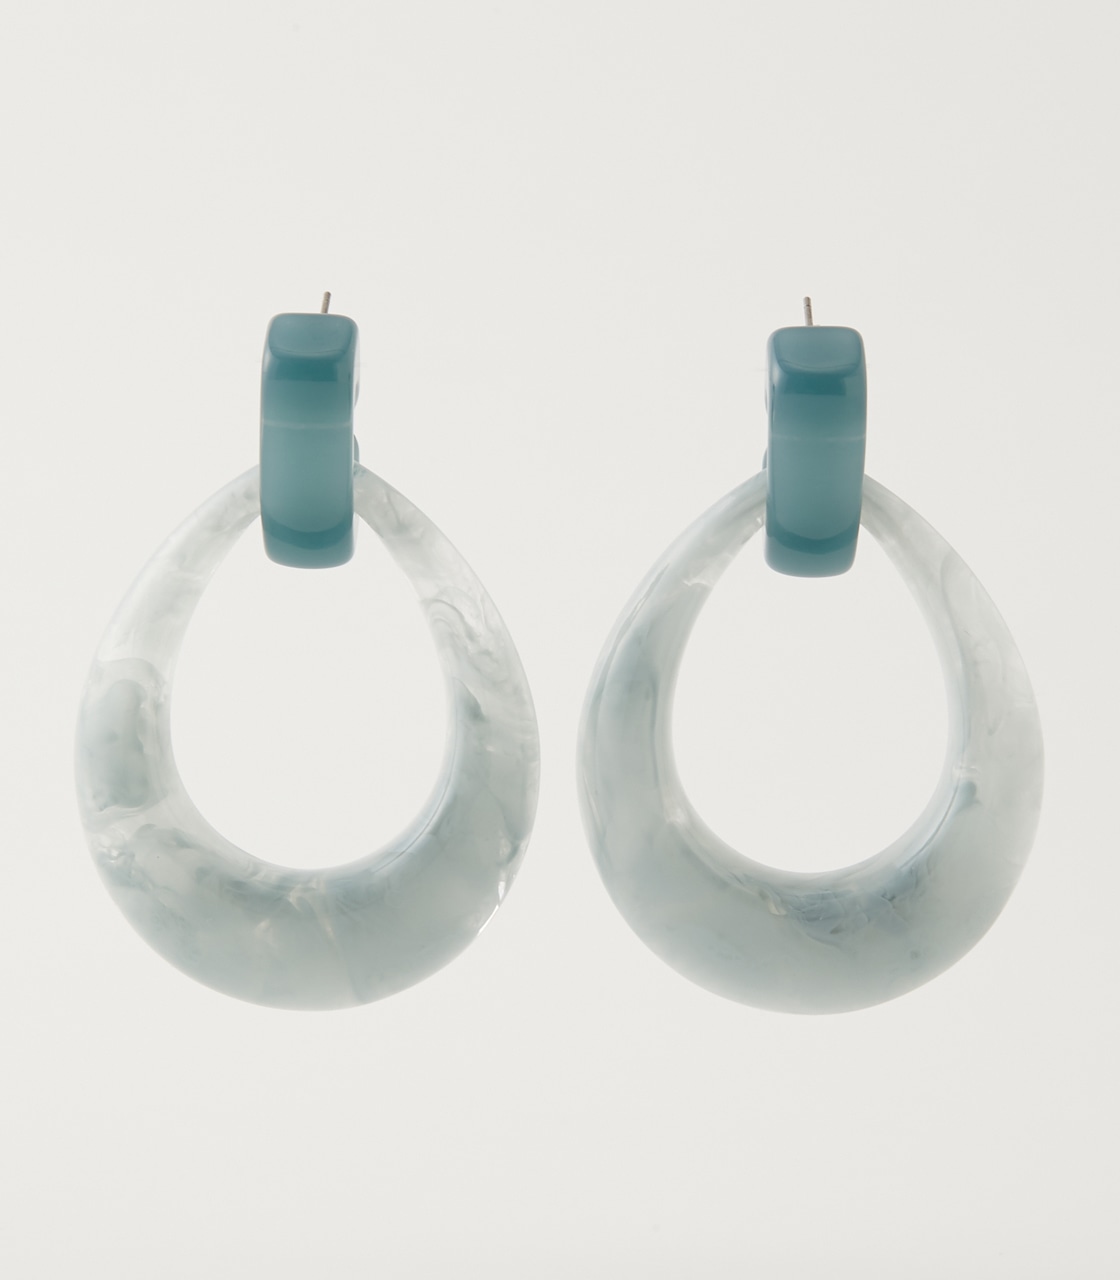 TEAR TYPE MARBLE EARRINGS/ティアタイプマーブルピアス 詳細画像 柄GRY 1